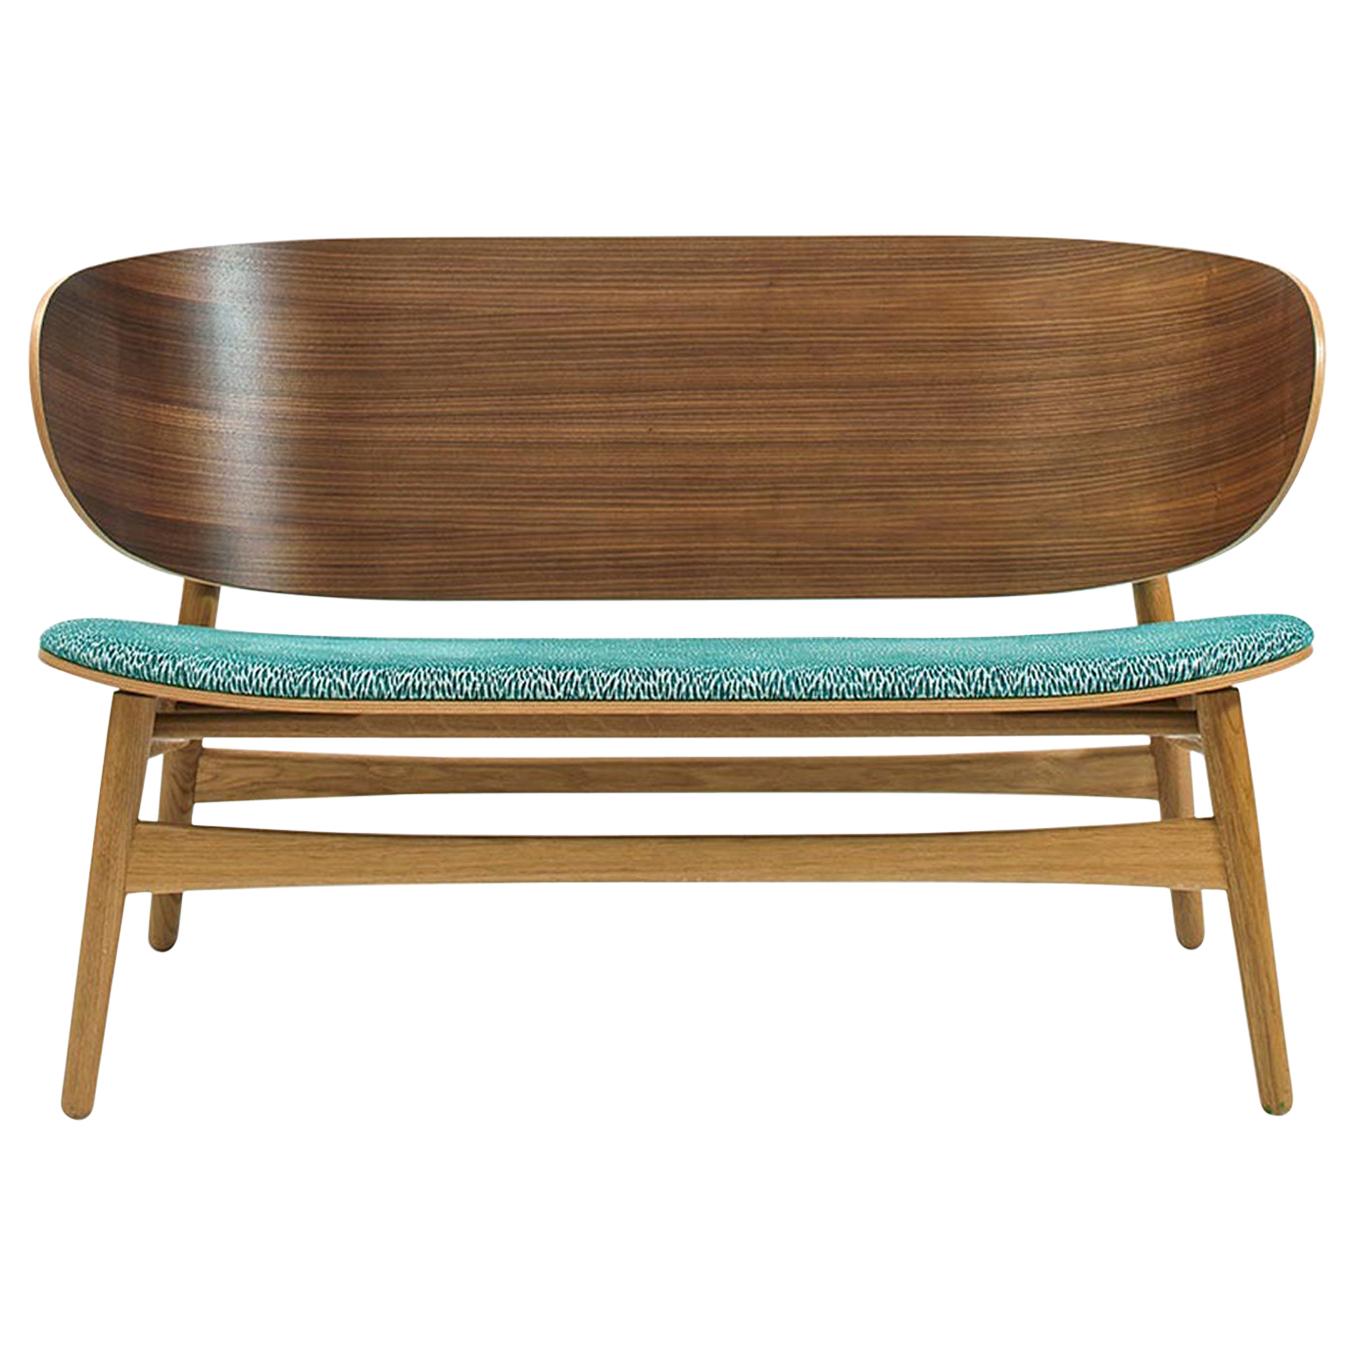 Hans Wegner GE-1935 Bench with Upholstered Seat - Lacquered Walnut